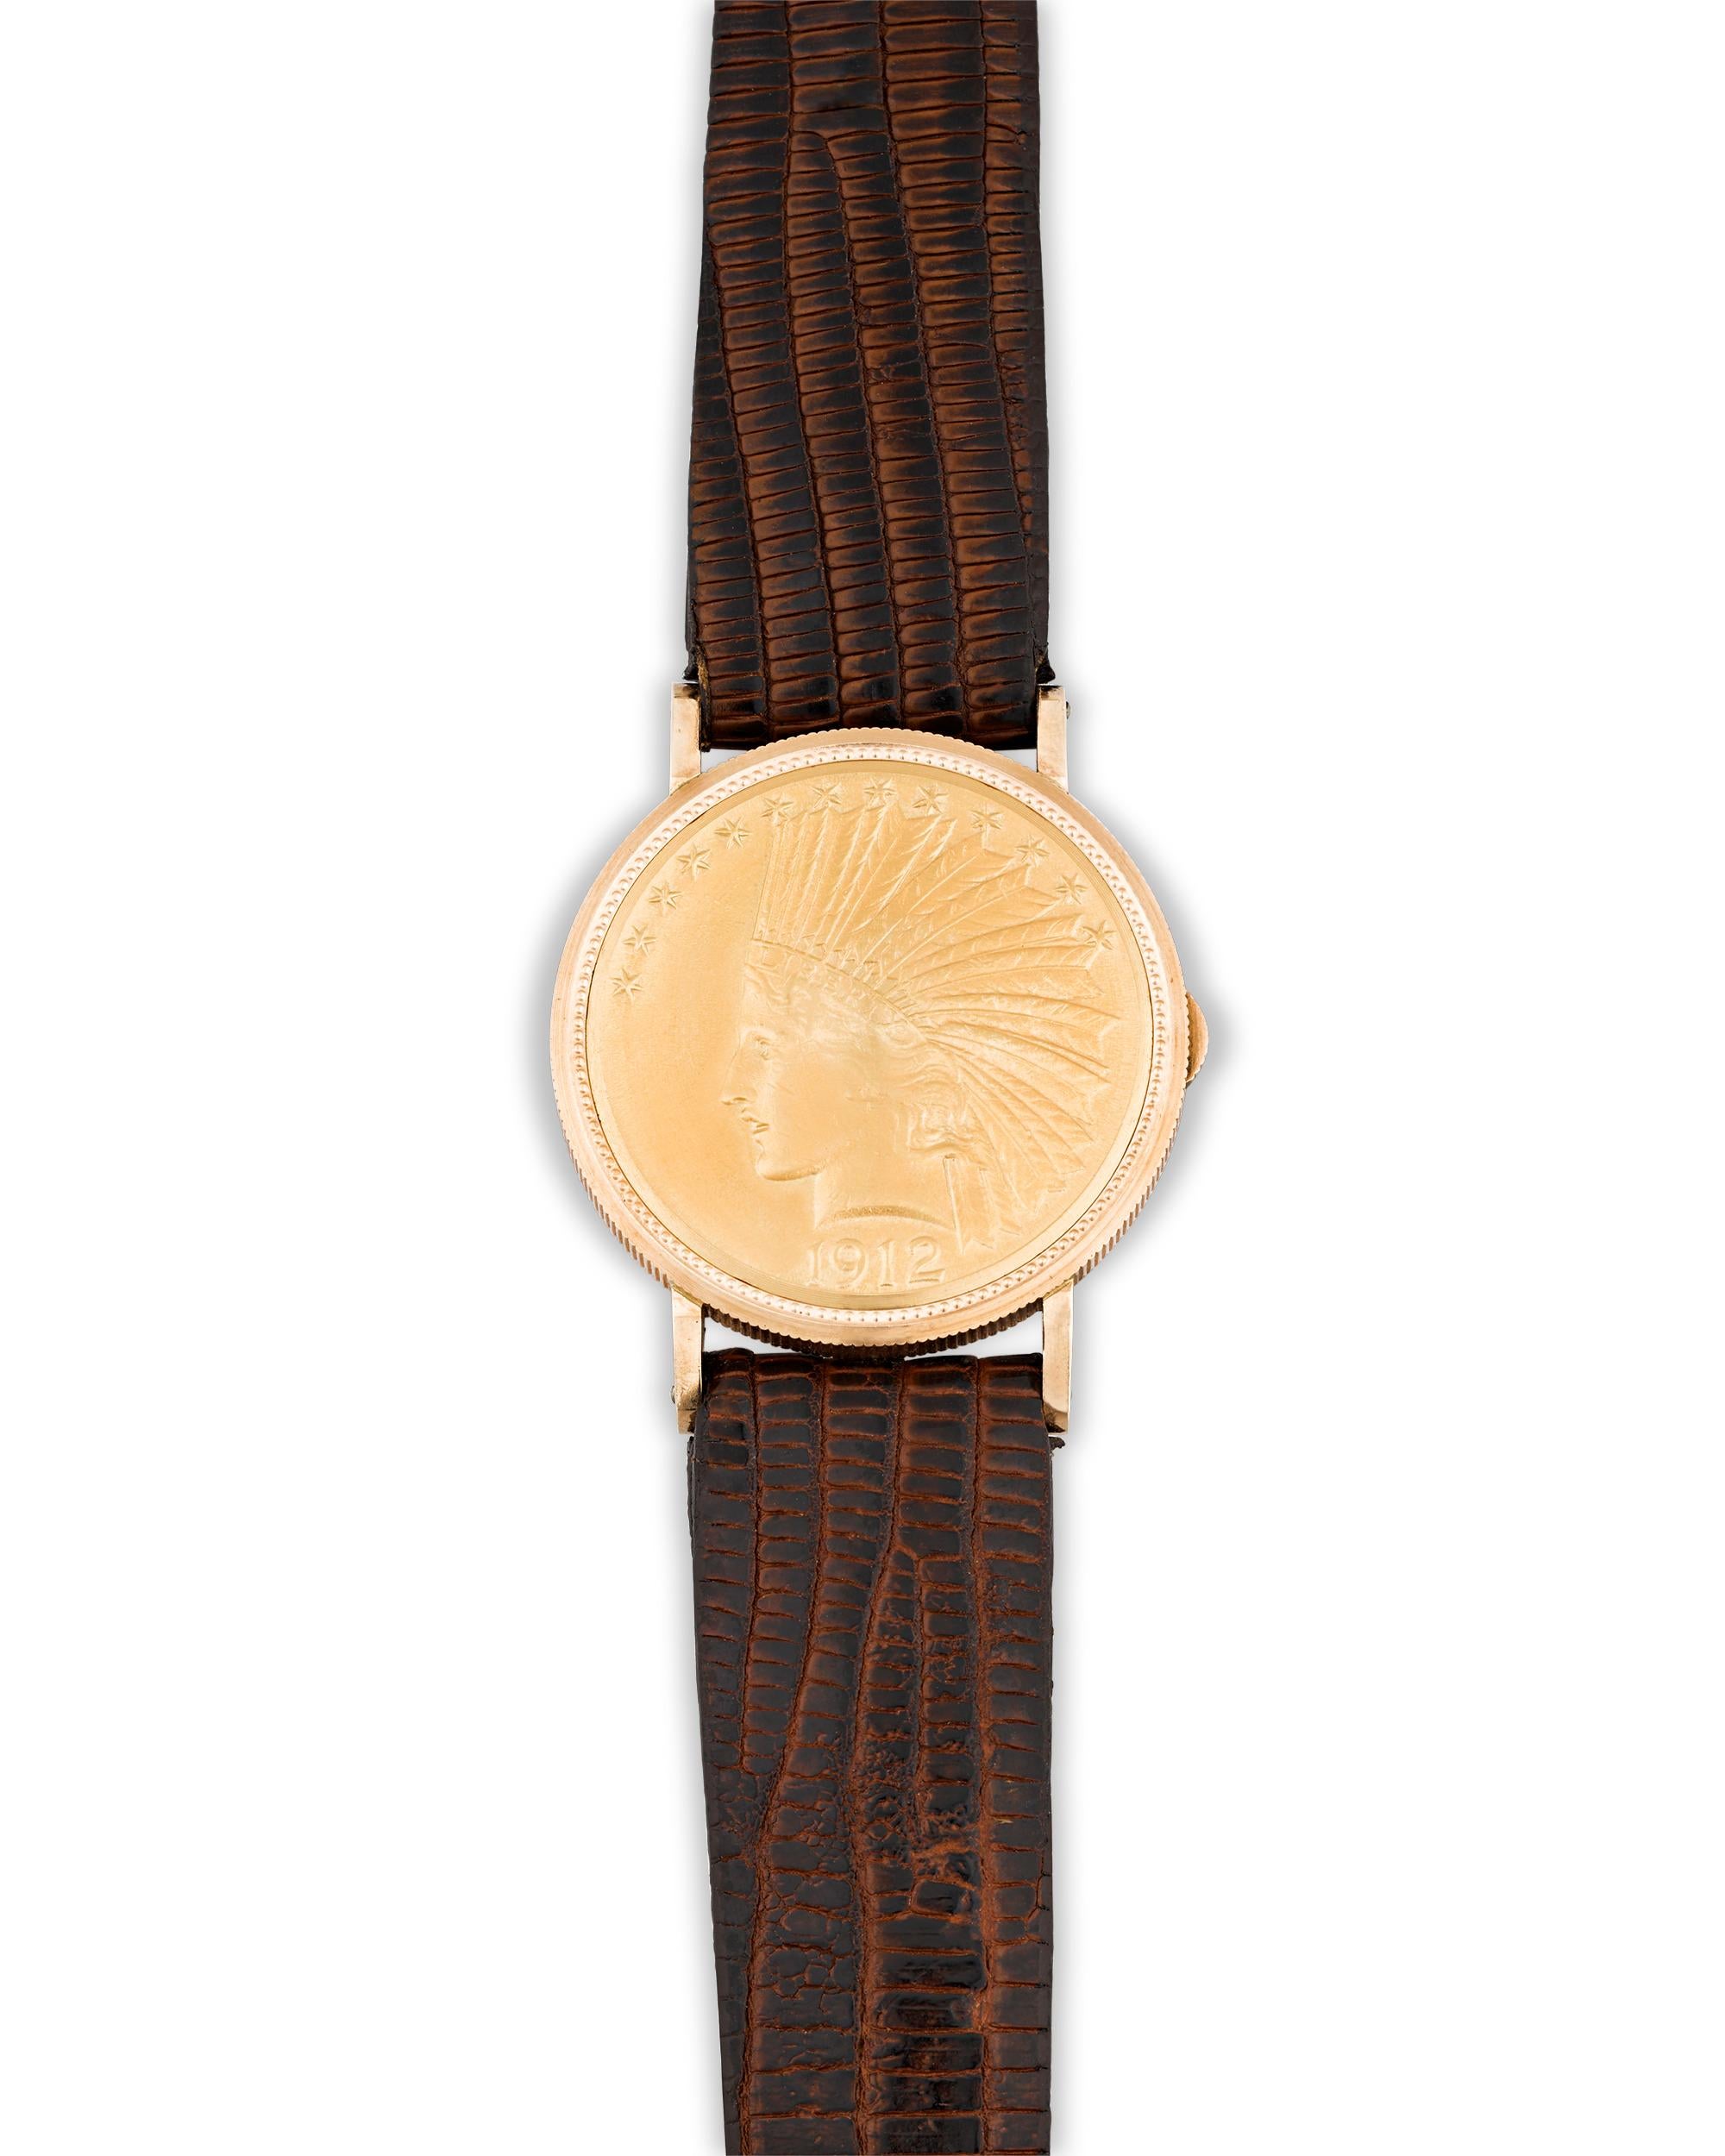 From the personal collection of baseball Hall of Famer Joe DiMaggio comes this presentation watch was given to the sports legend by Harrah's Casino in 1967 in celebration of his 50th birthday. Incorporating a rare 1912 U.S. $10 gold coin, the watch